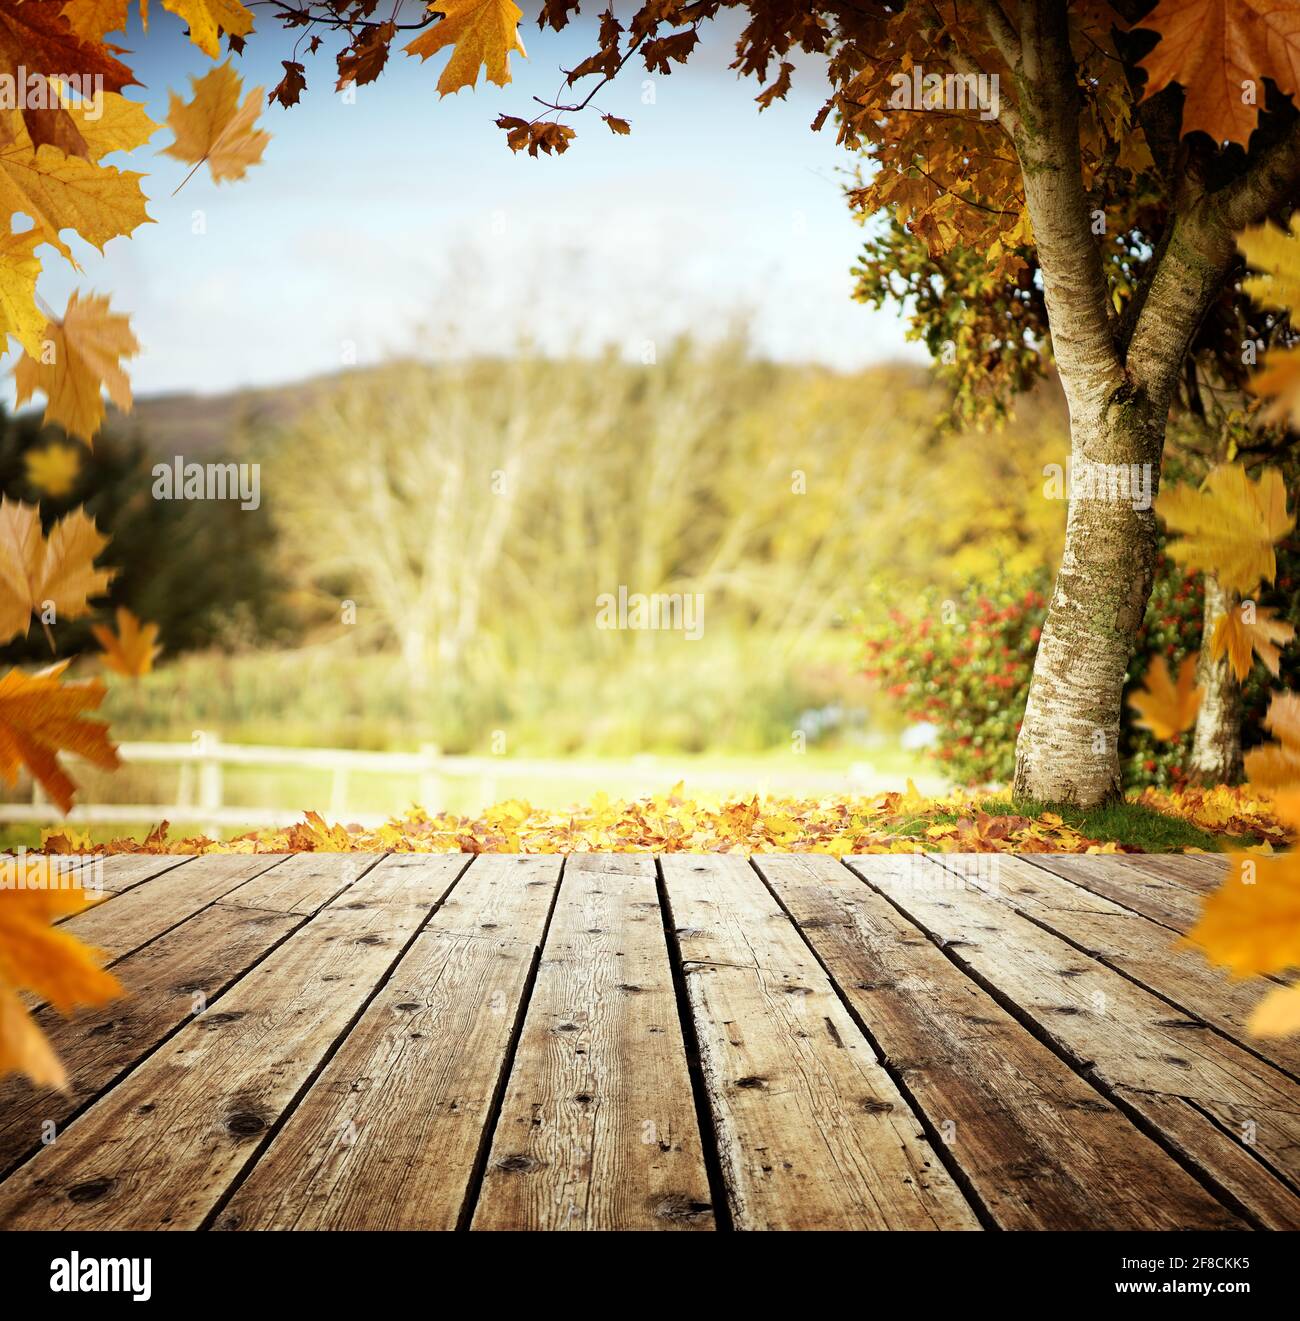 Autumn leaves and wooden table background with copy space Stock Photo